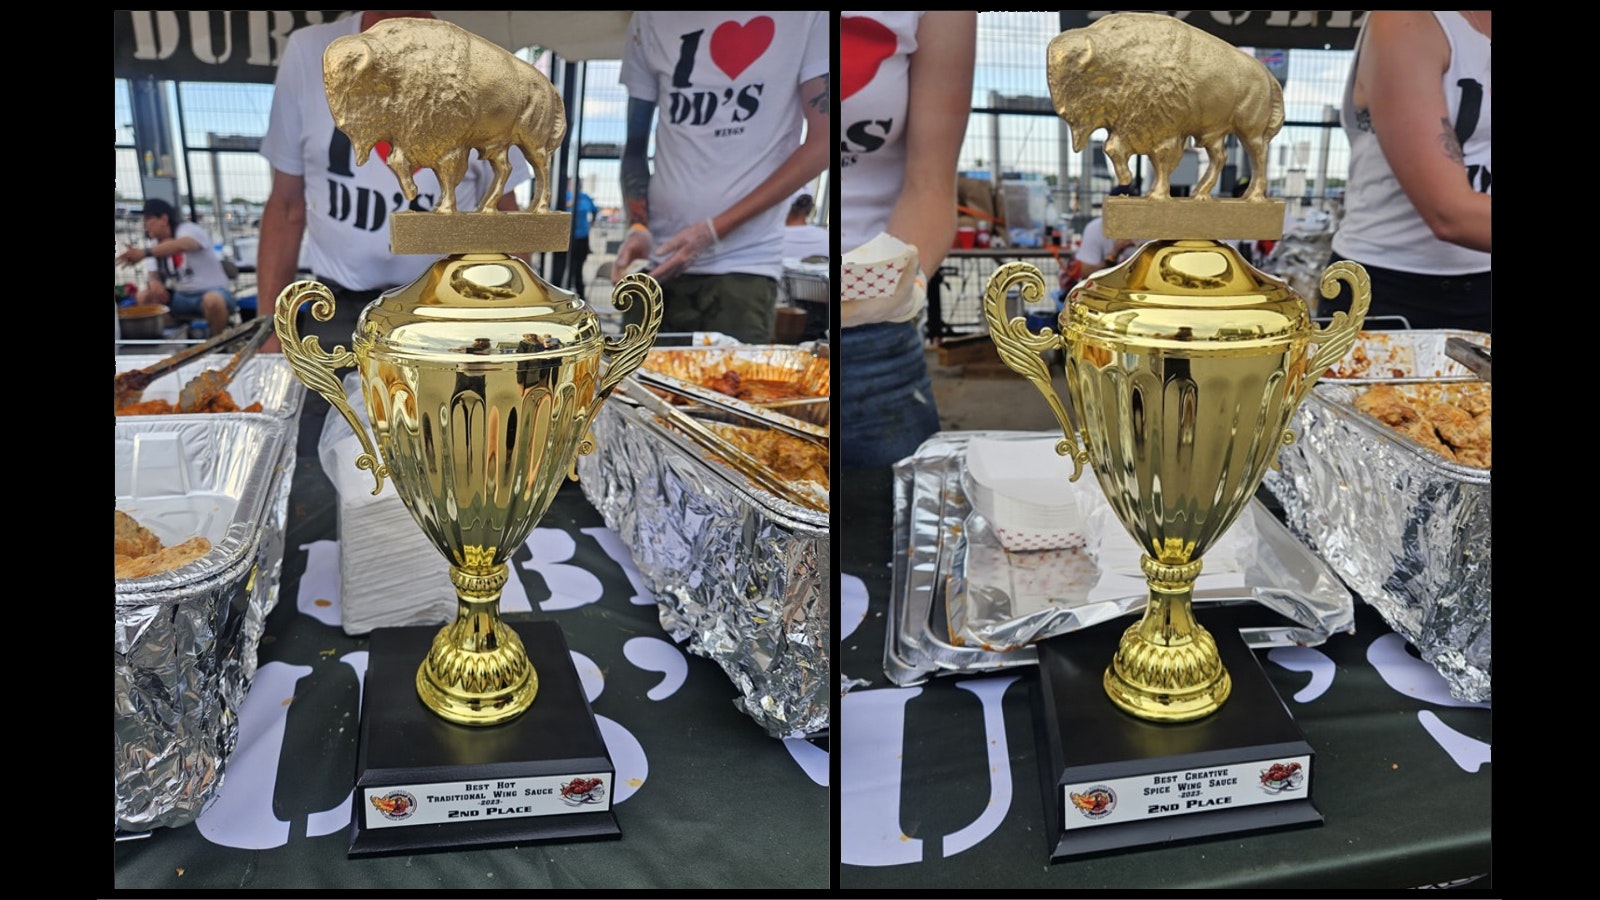 Double Dubs won second place for both Hot Traditional Wing Sauce and Creative Spicy Wing Sauce.